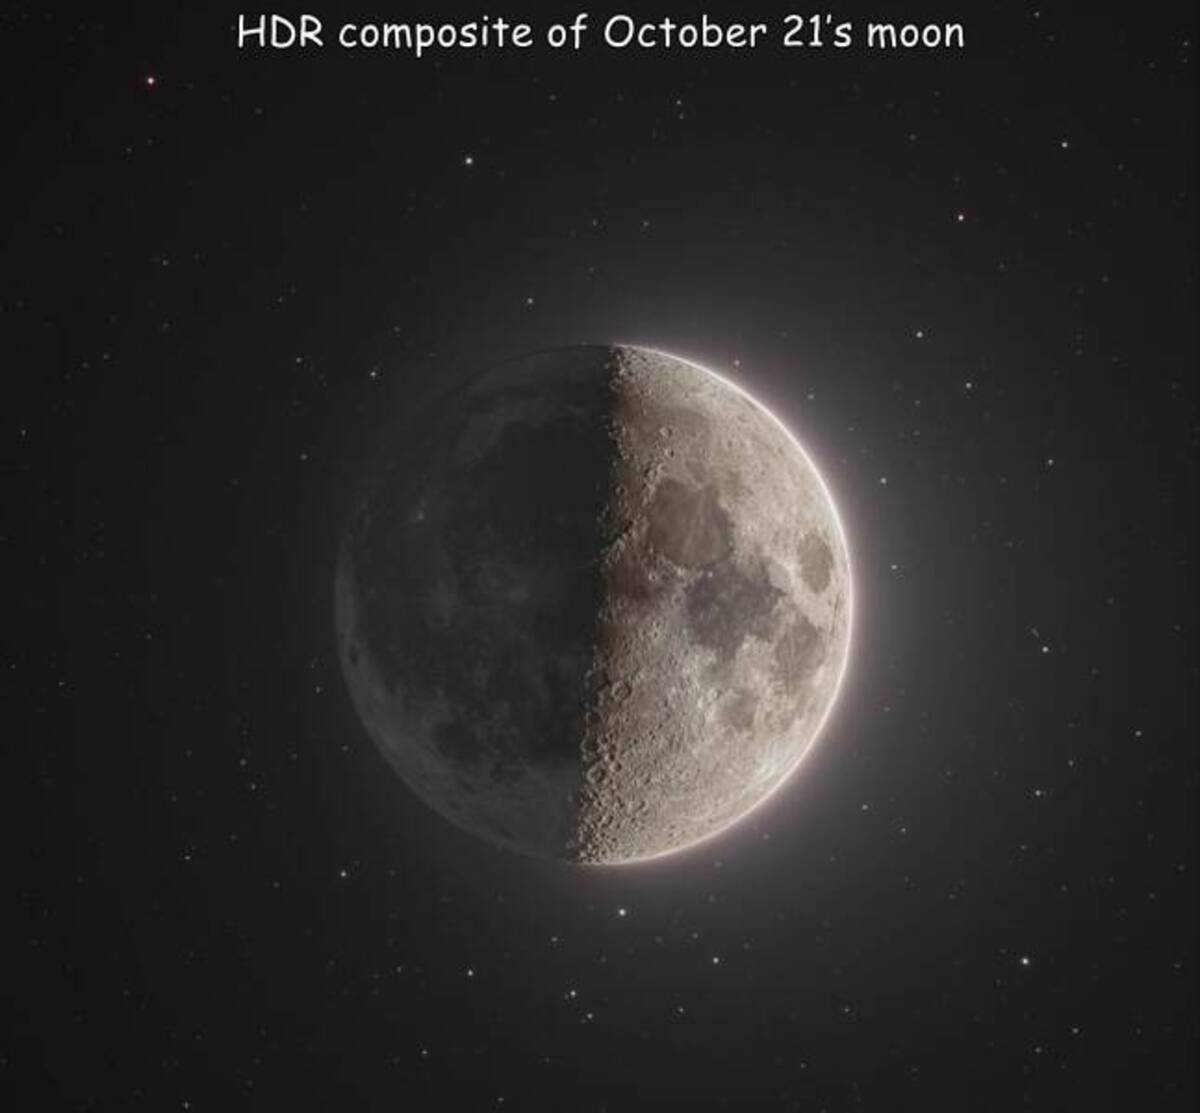 atmosphere - Hdr composite of October 21's moon